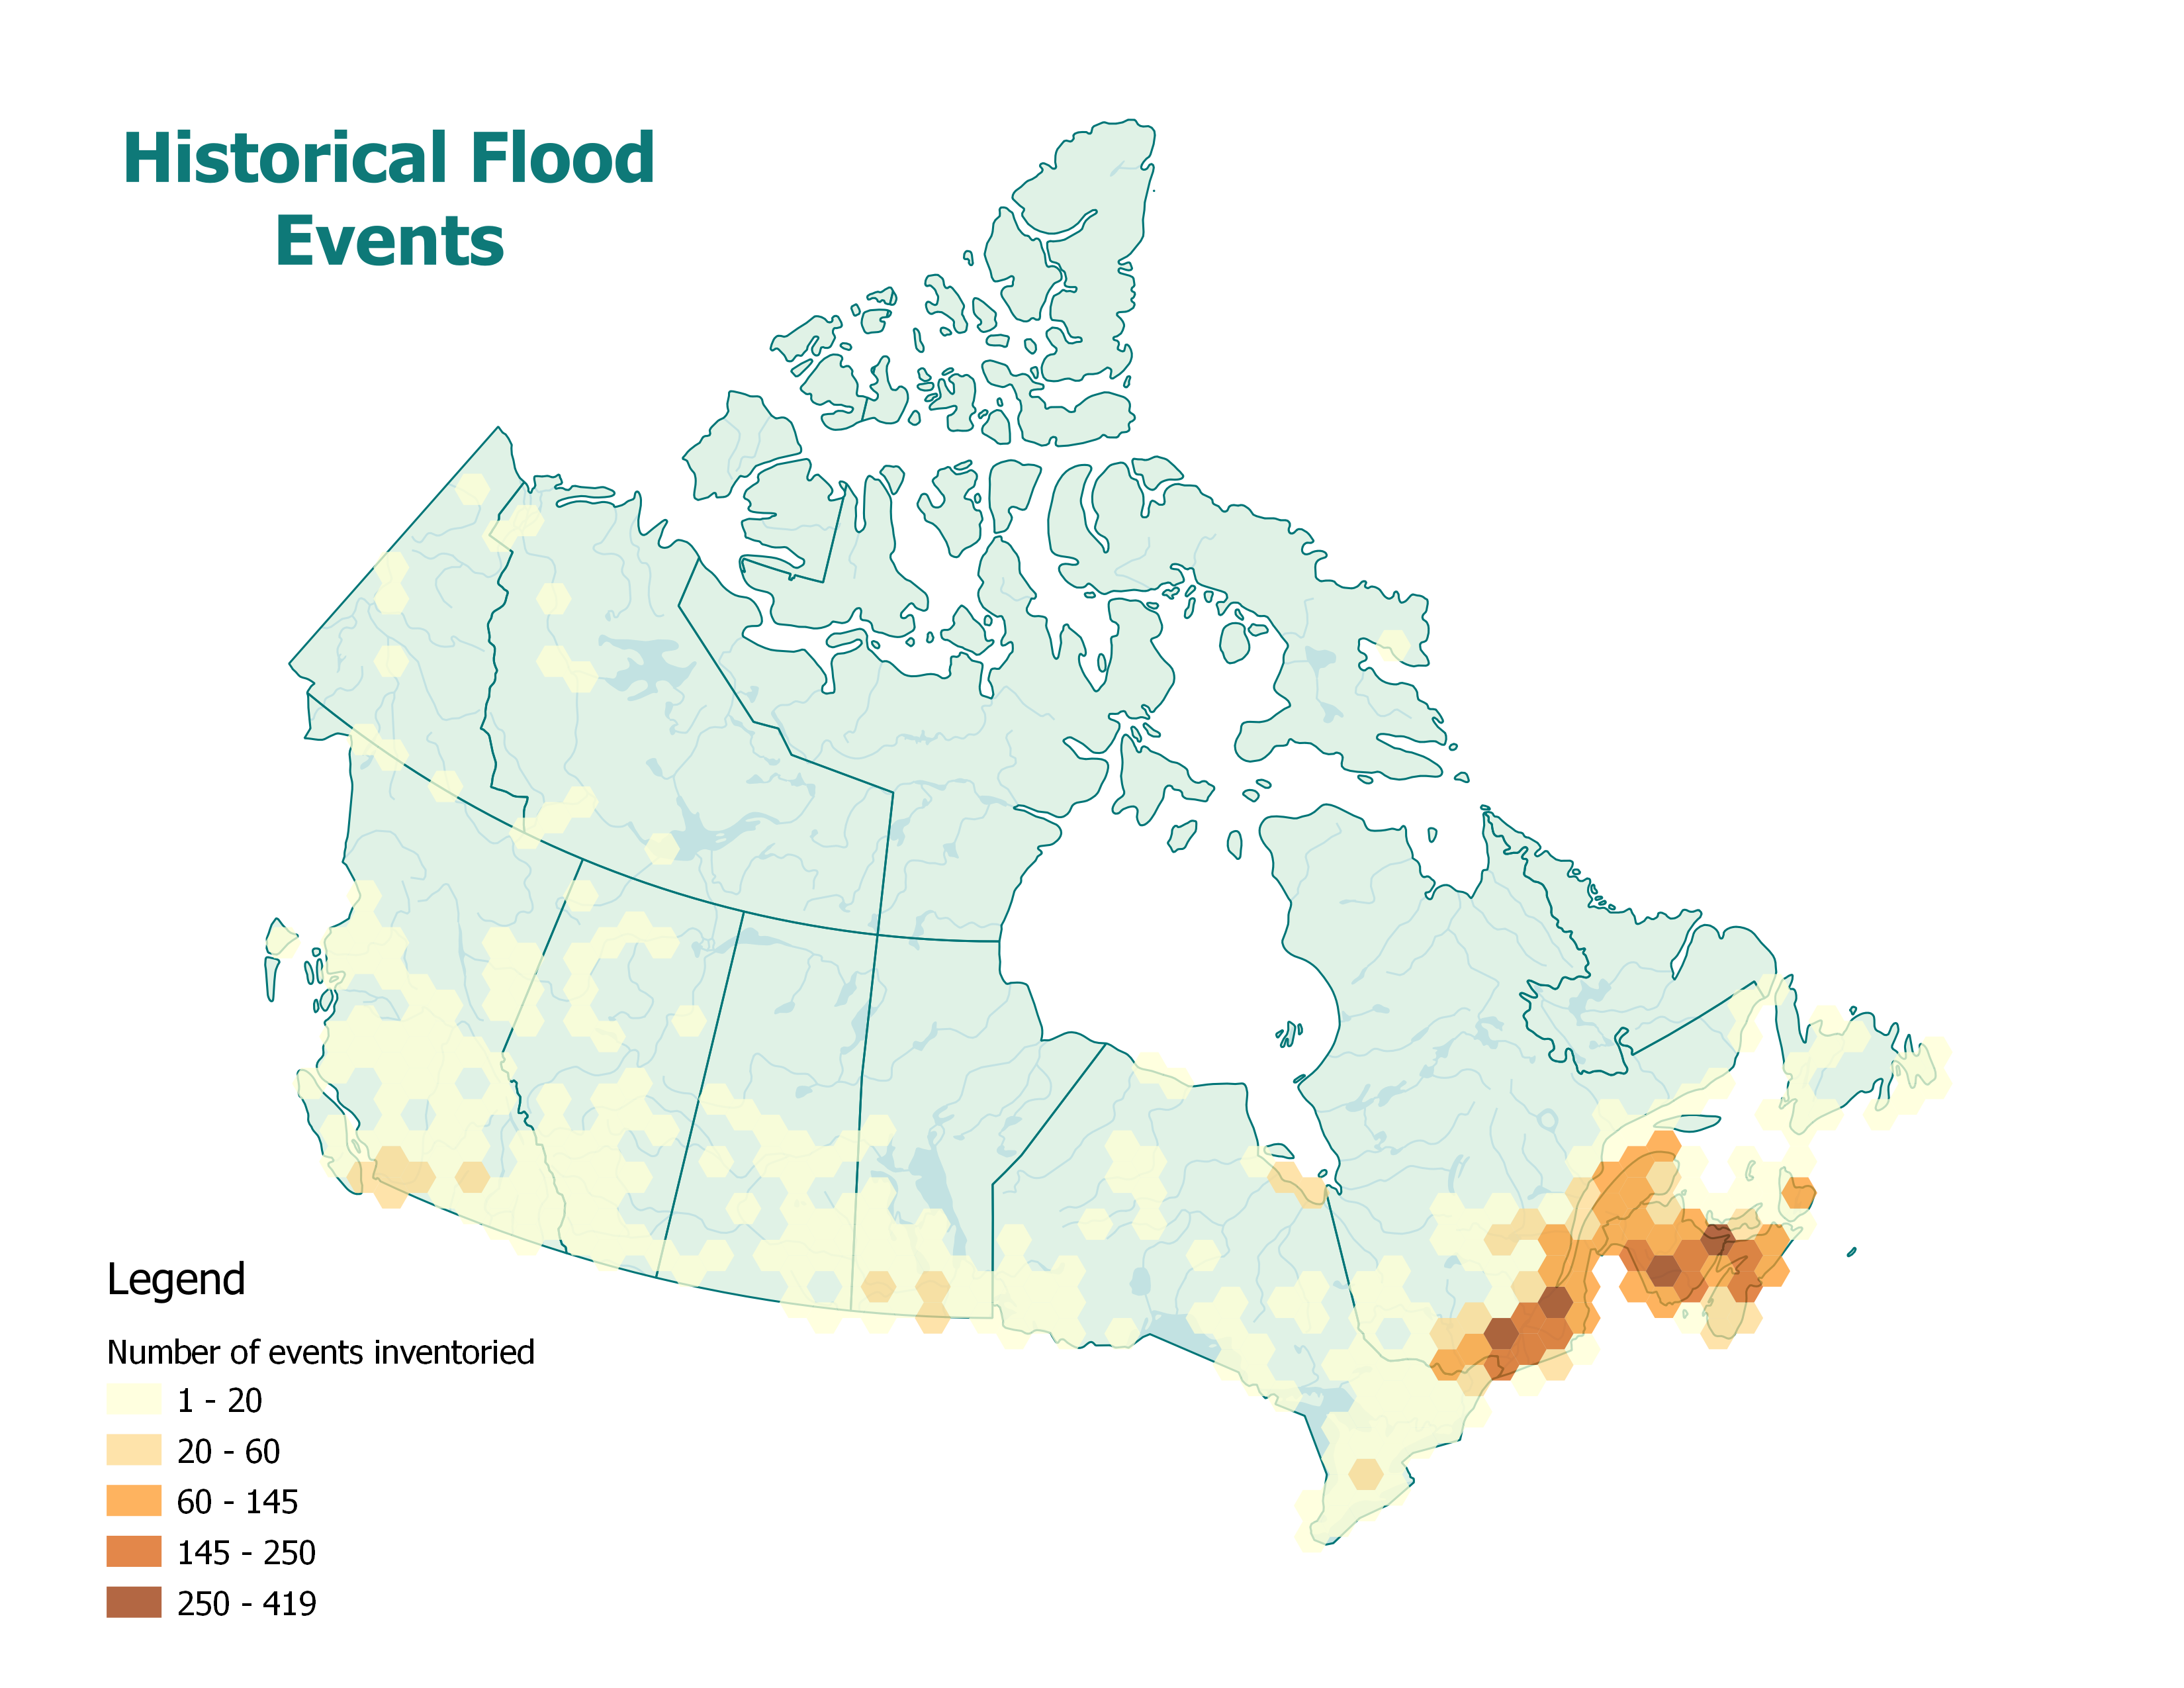 Map of Canada showing the number of historical flood events inventoried. More than 60 historical flood events have been inventoried in Quebec south of the St. Lawrence and in the Maritime provinces. The areas displayed using a colour gradient from the lightest colour showing with the least number of events inventoried to the darkest colour showing the most events. 